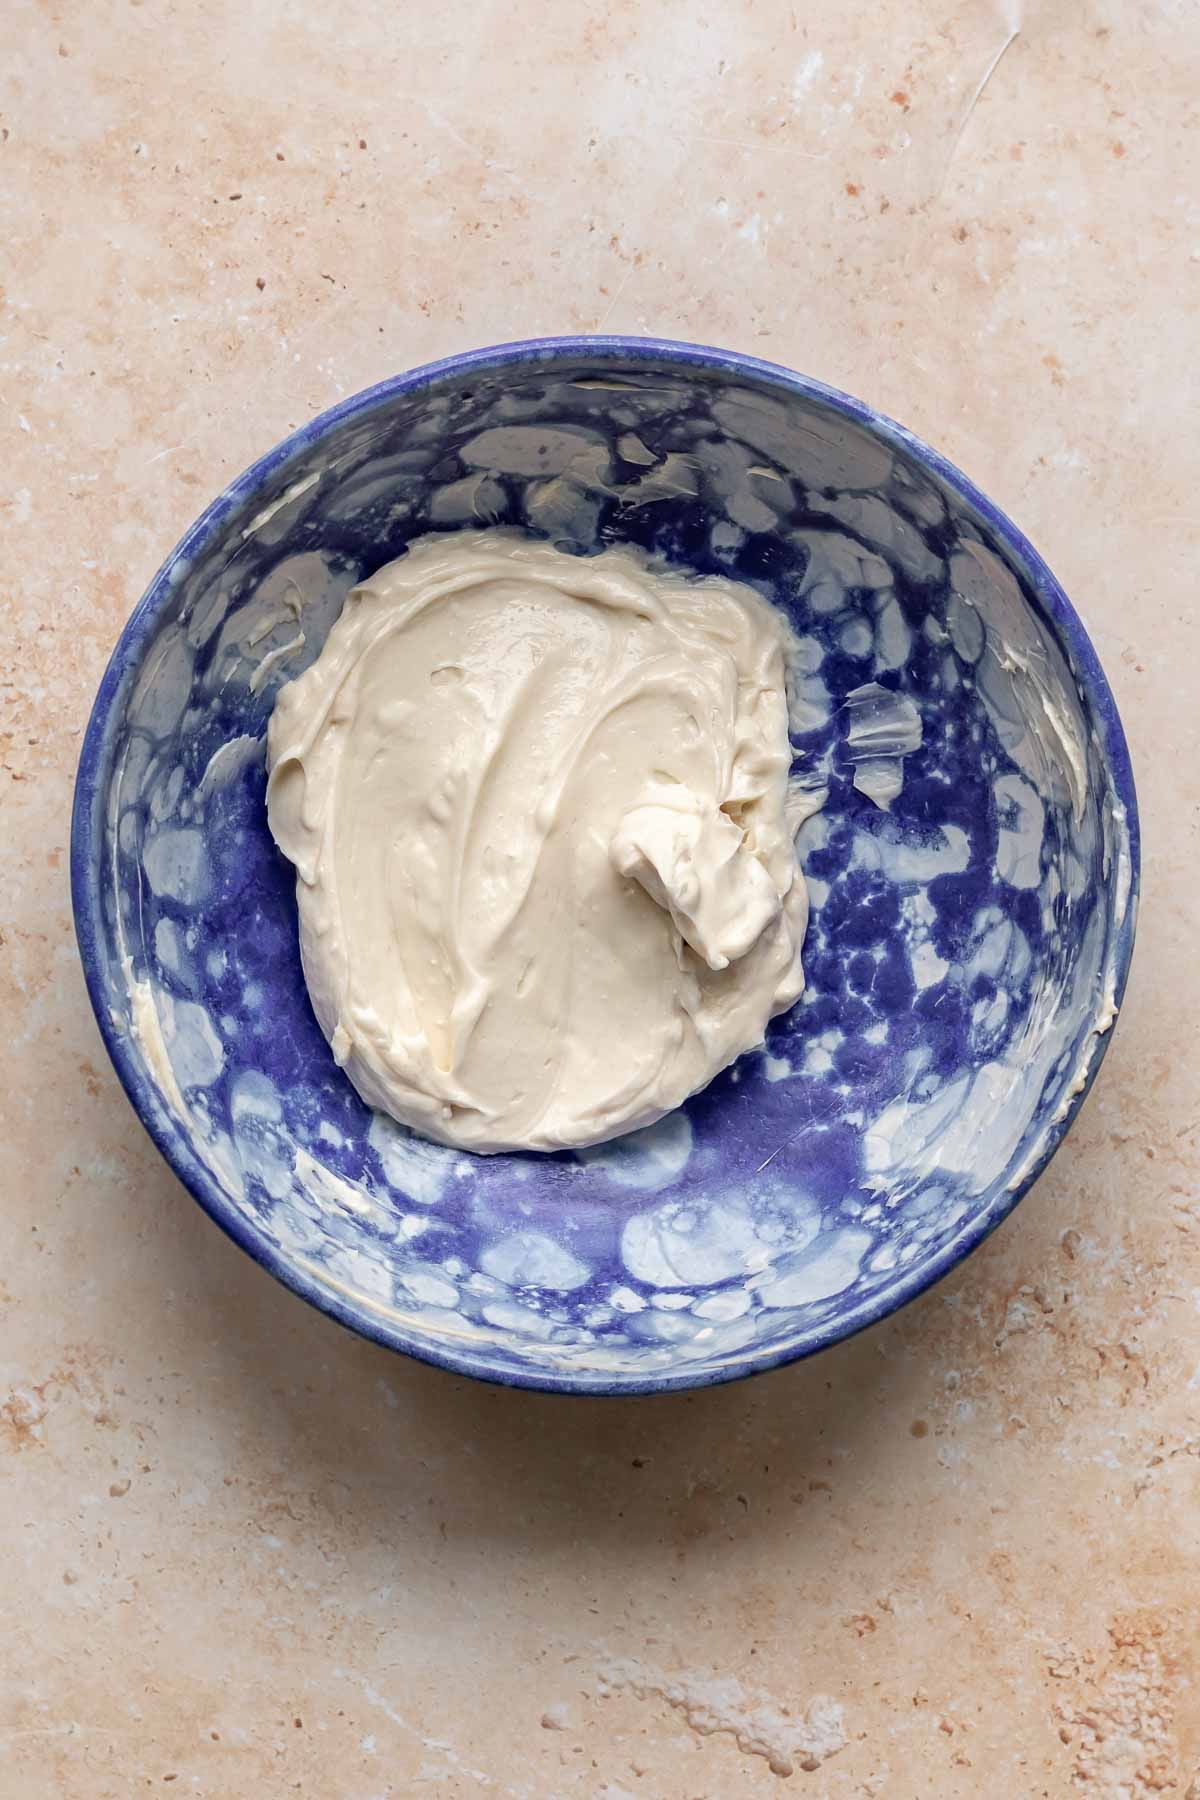 Cream cheese and sugar mixed together in a bowl.